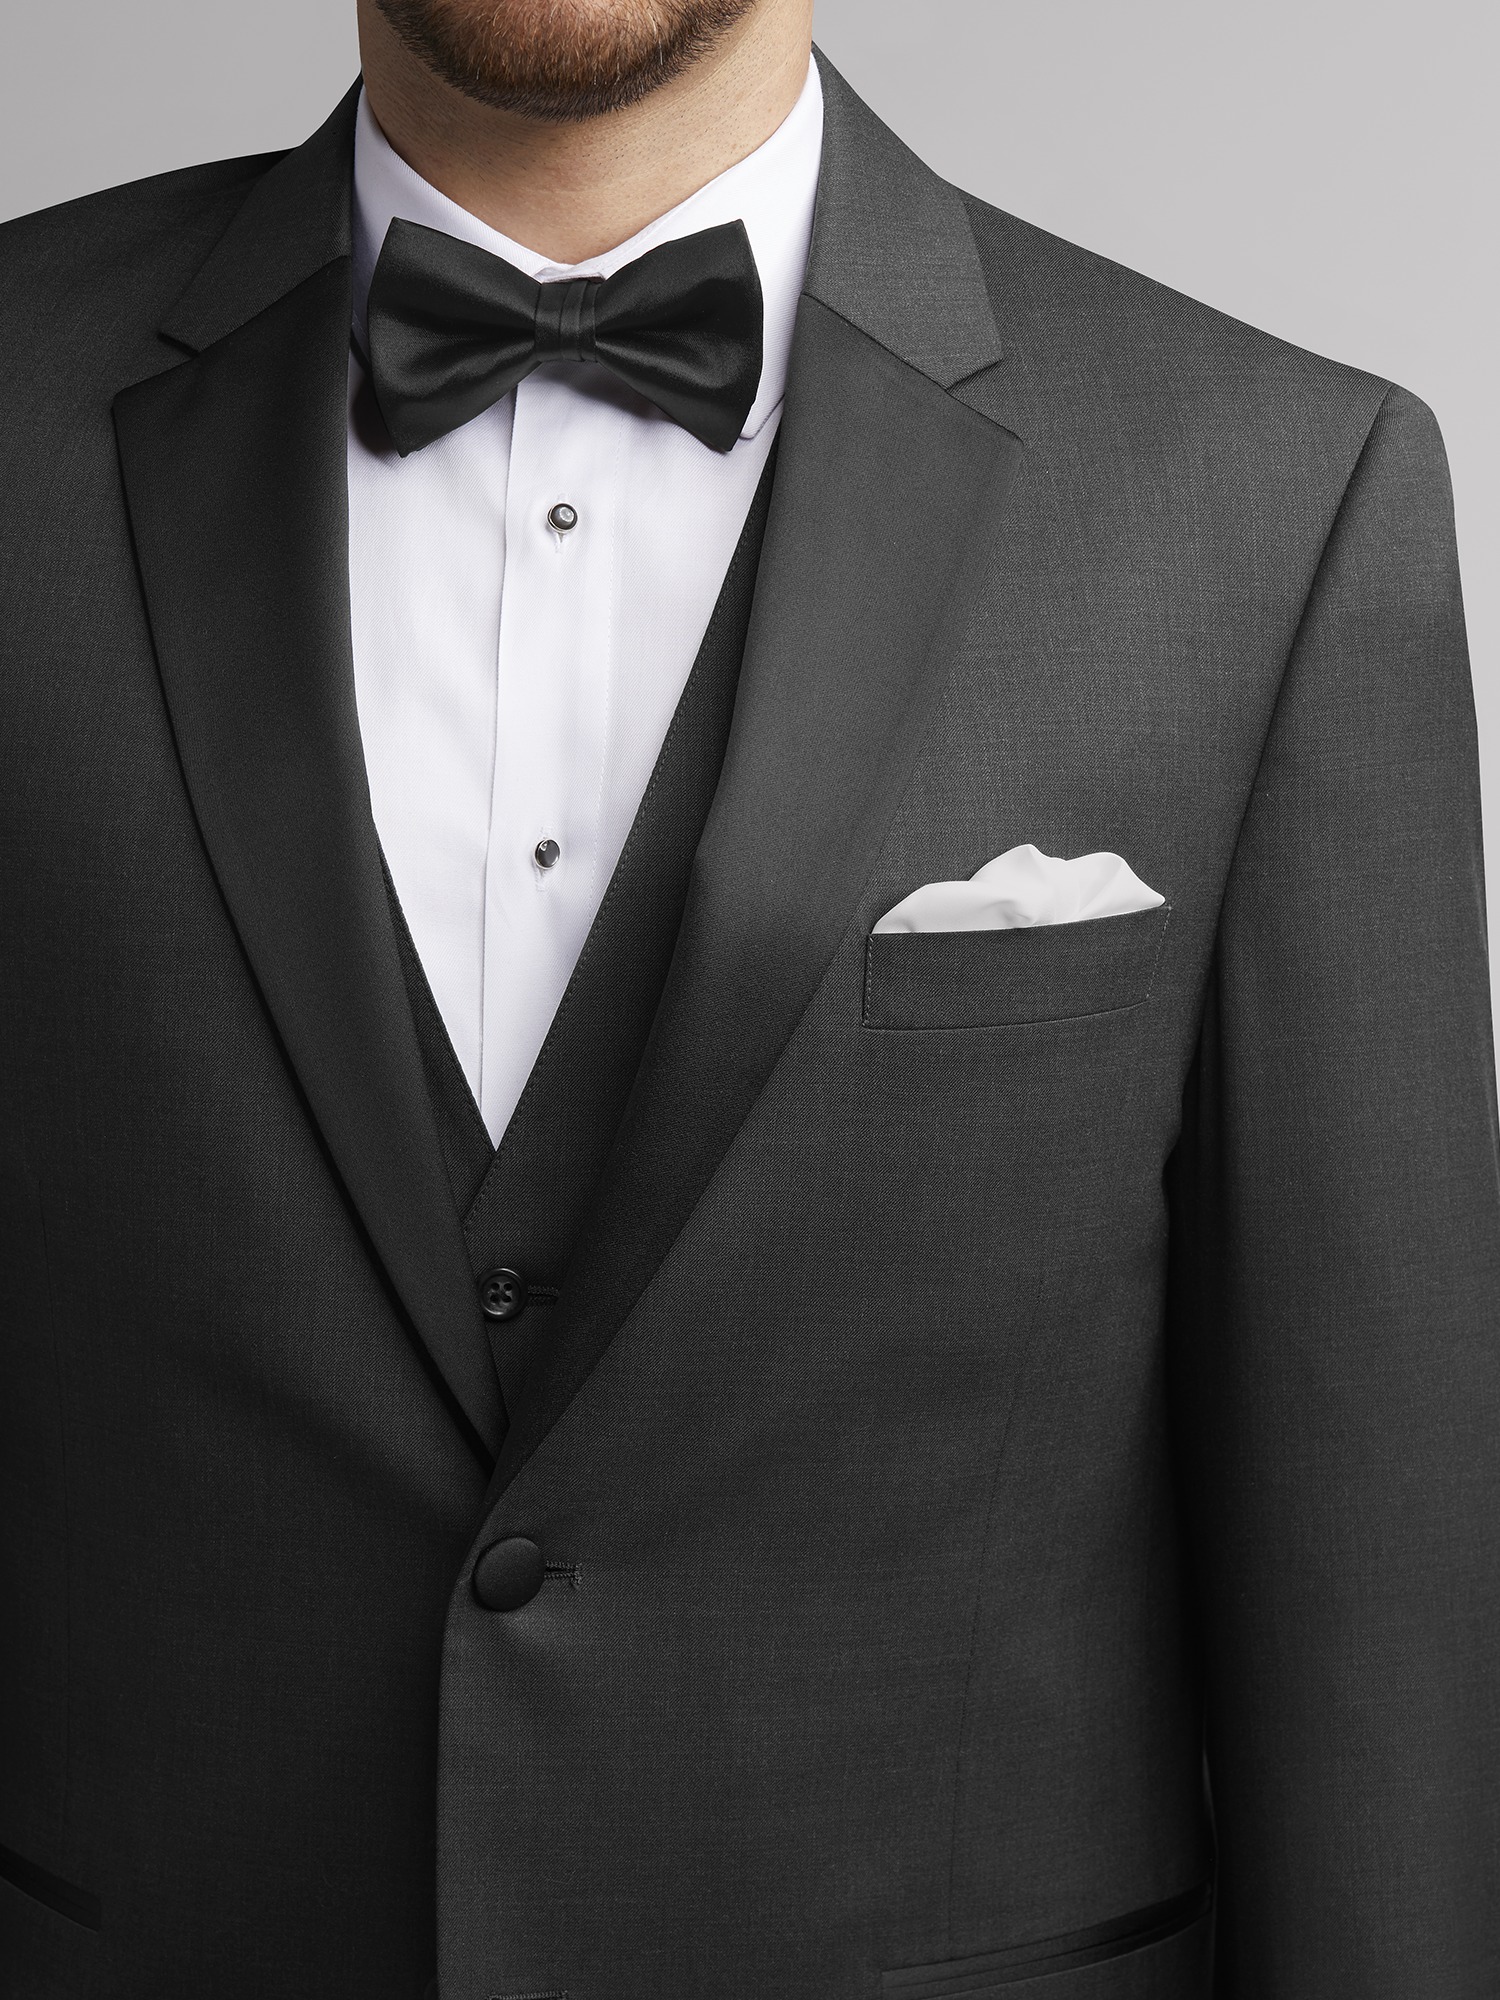 Performance Grey Suit by Calvin Klein